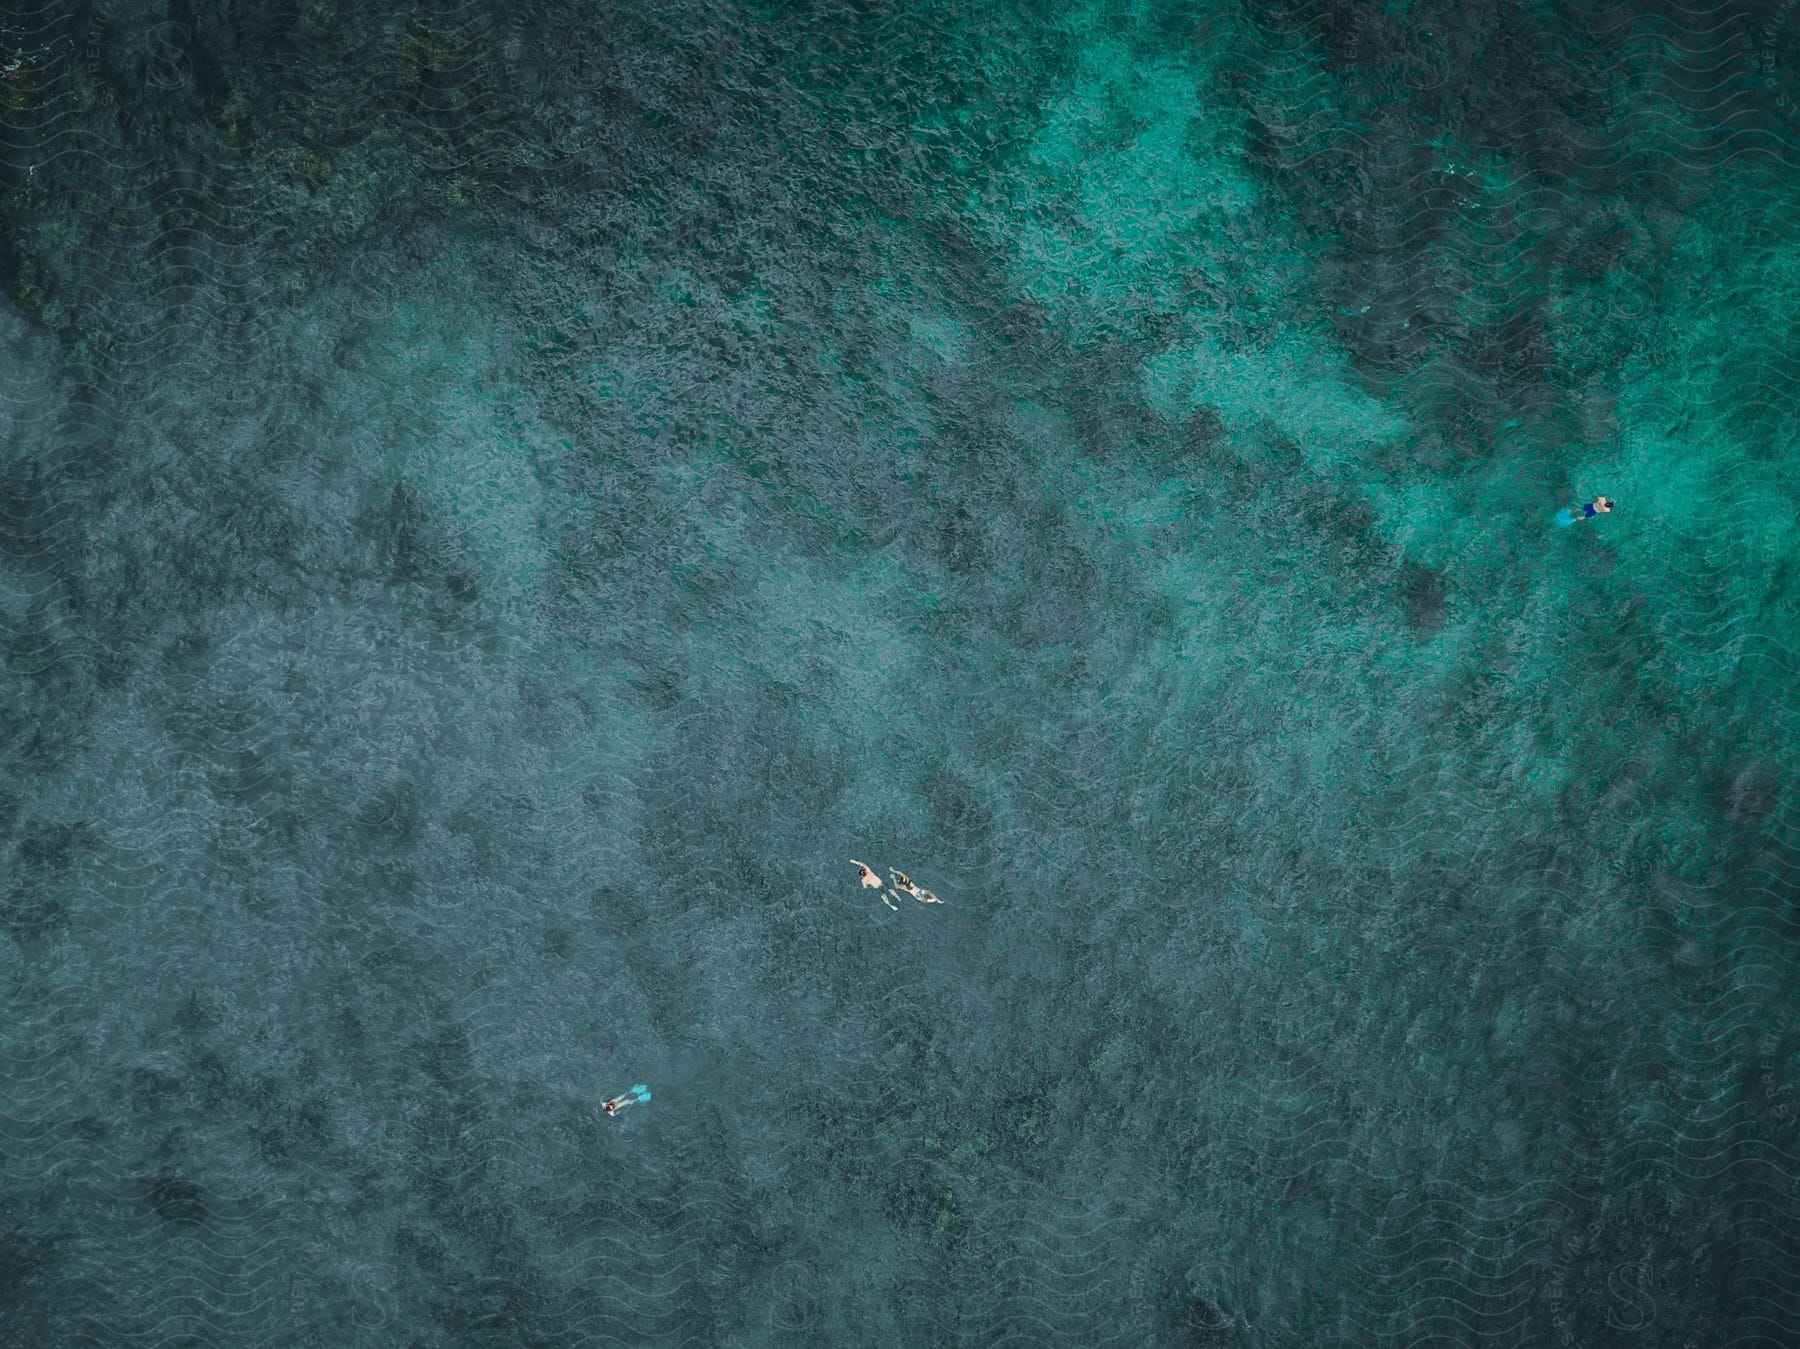 An aerial view of some people surfing and swimming in the ocean.